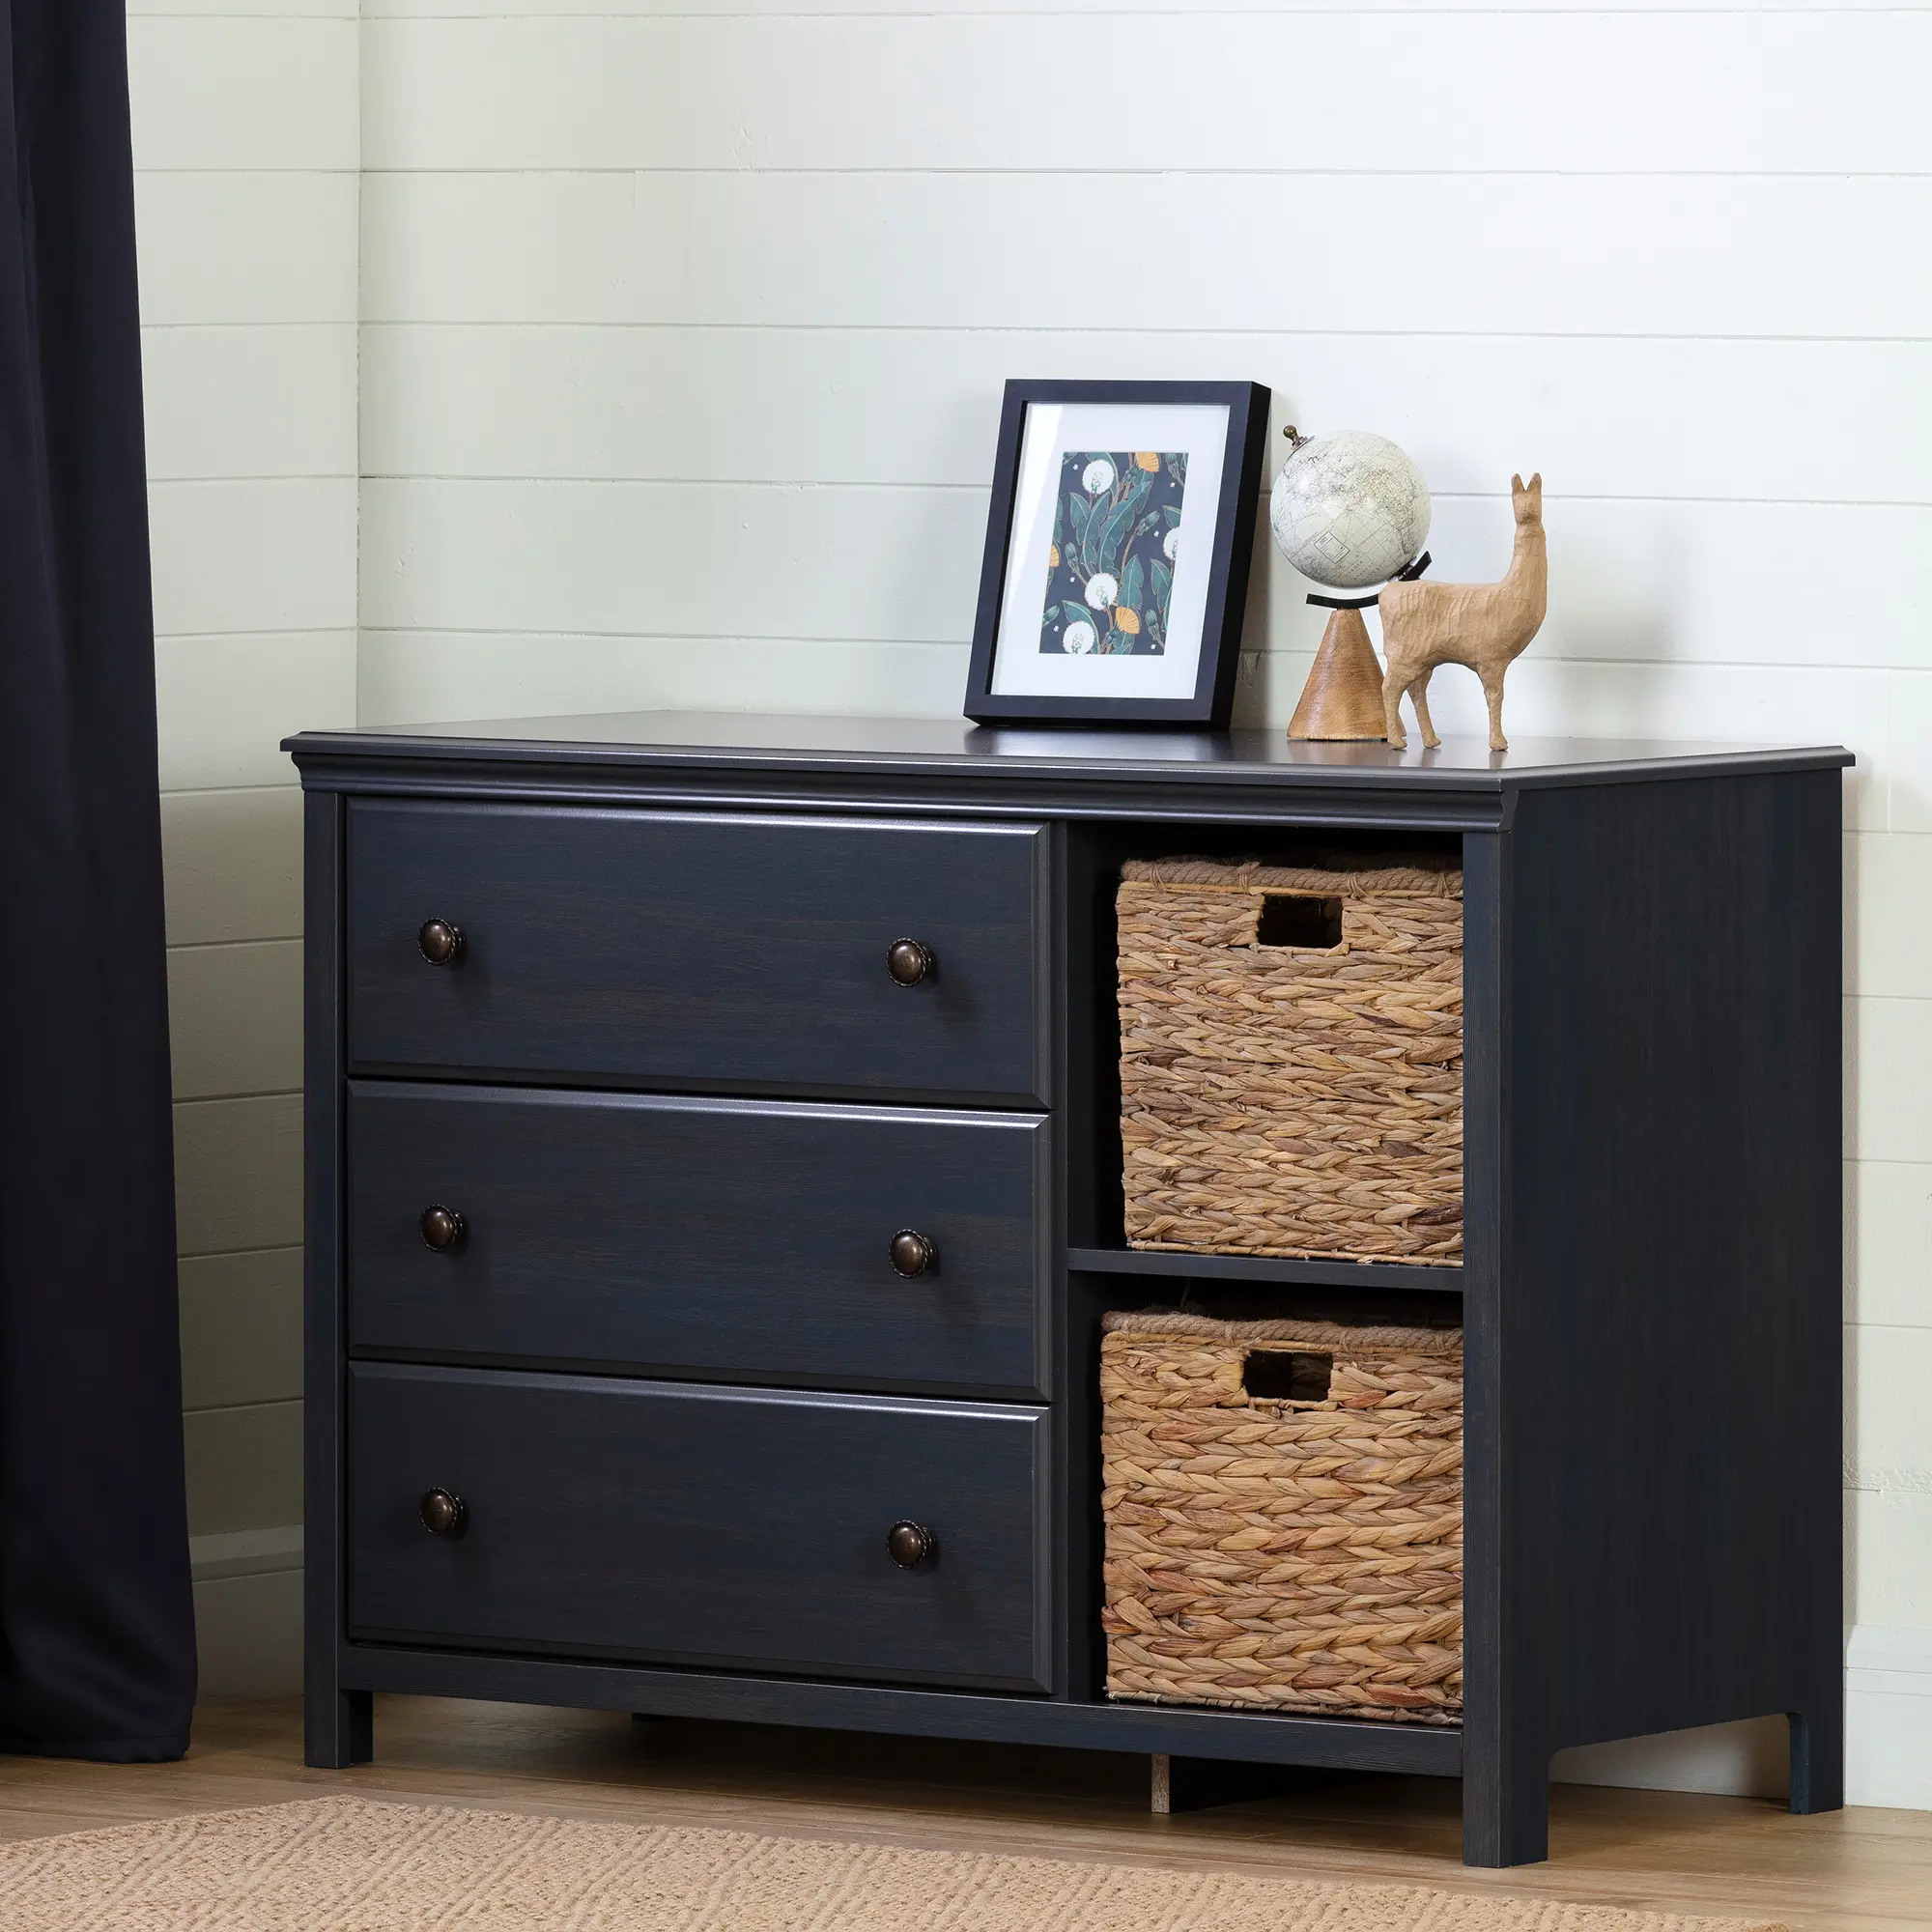 Cotton Candy Blue 3 Drawer Dresser with Baskets - South Shore